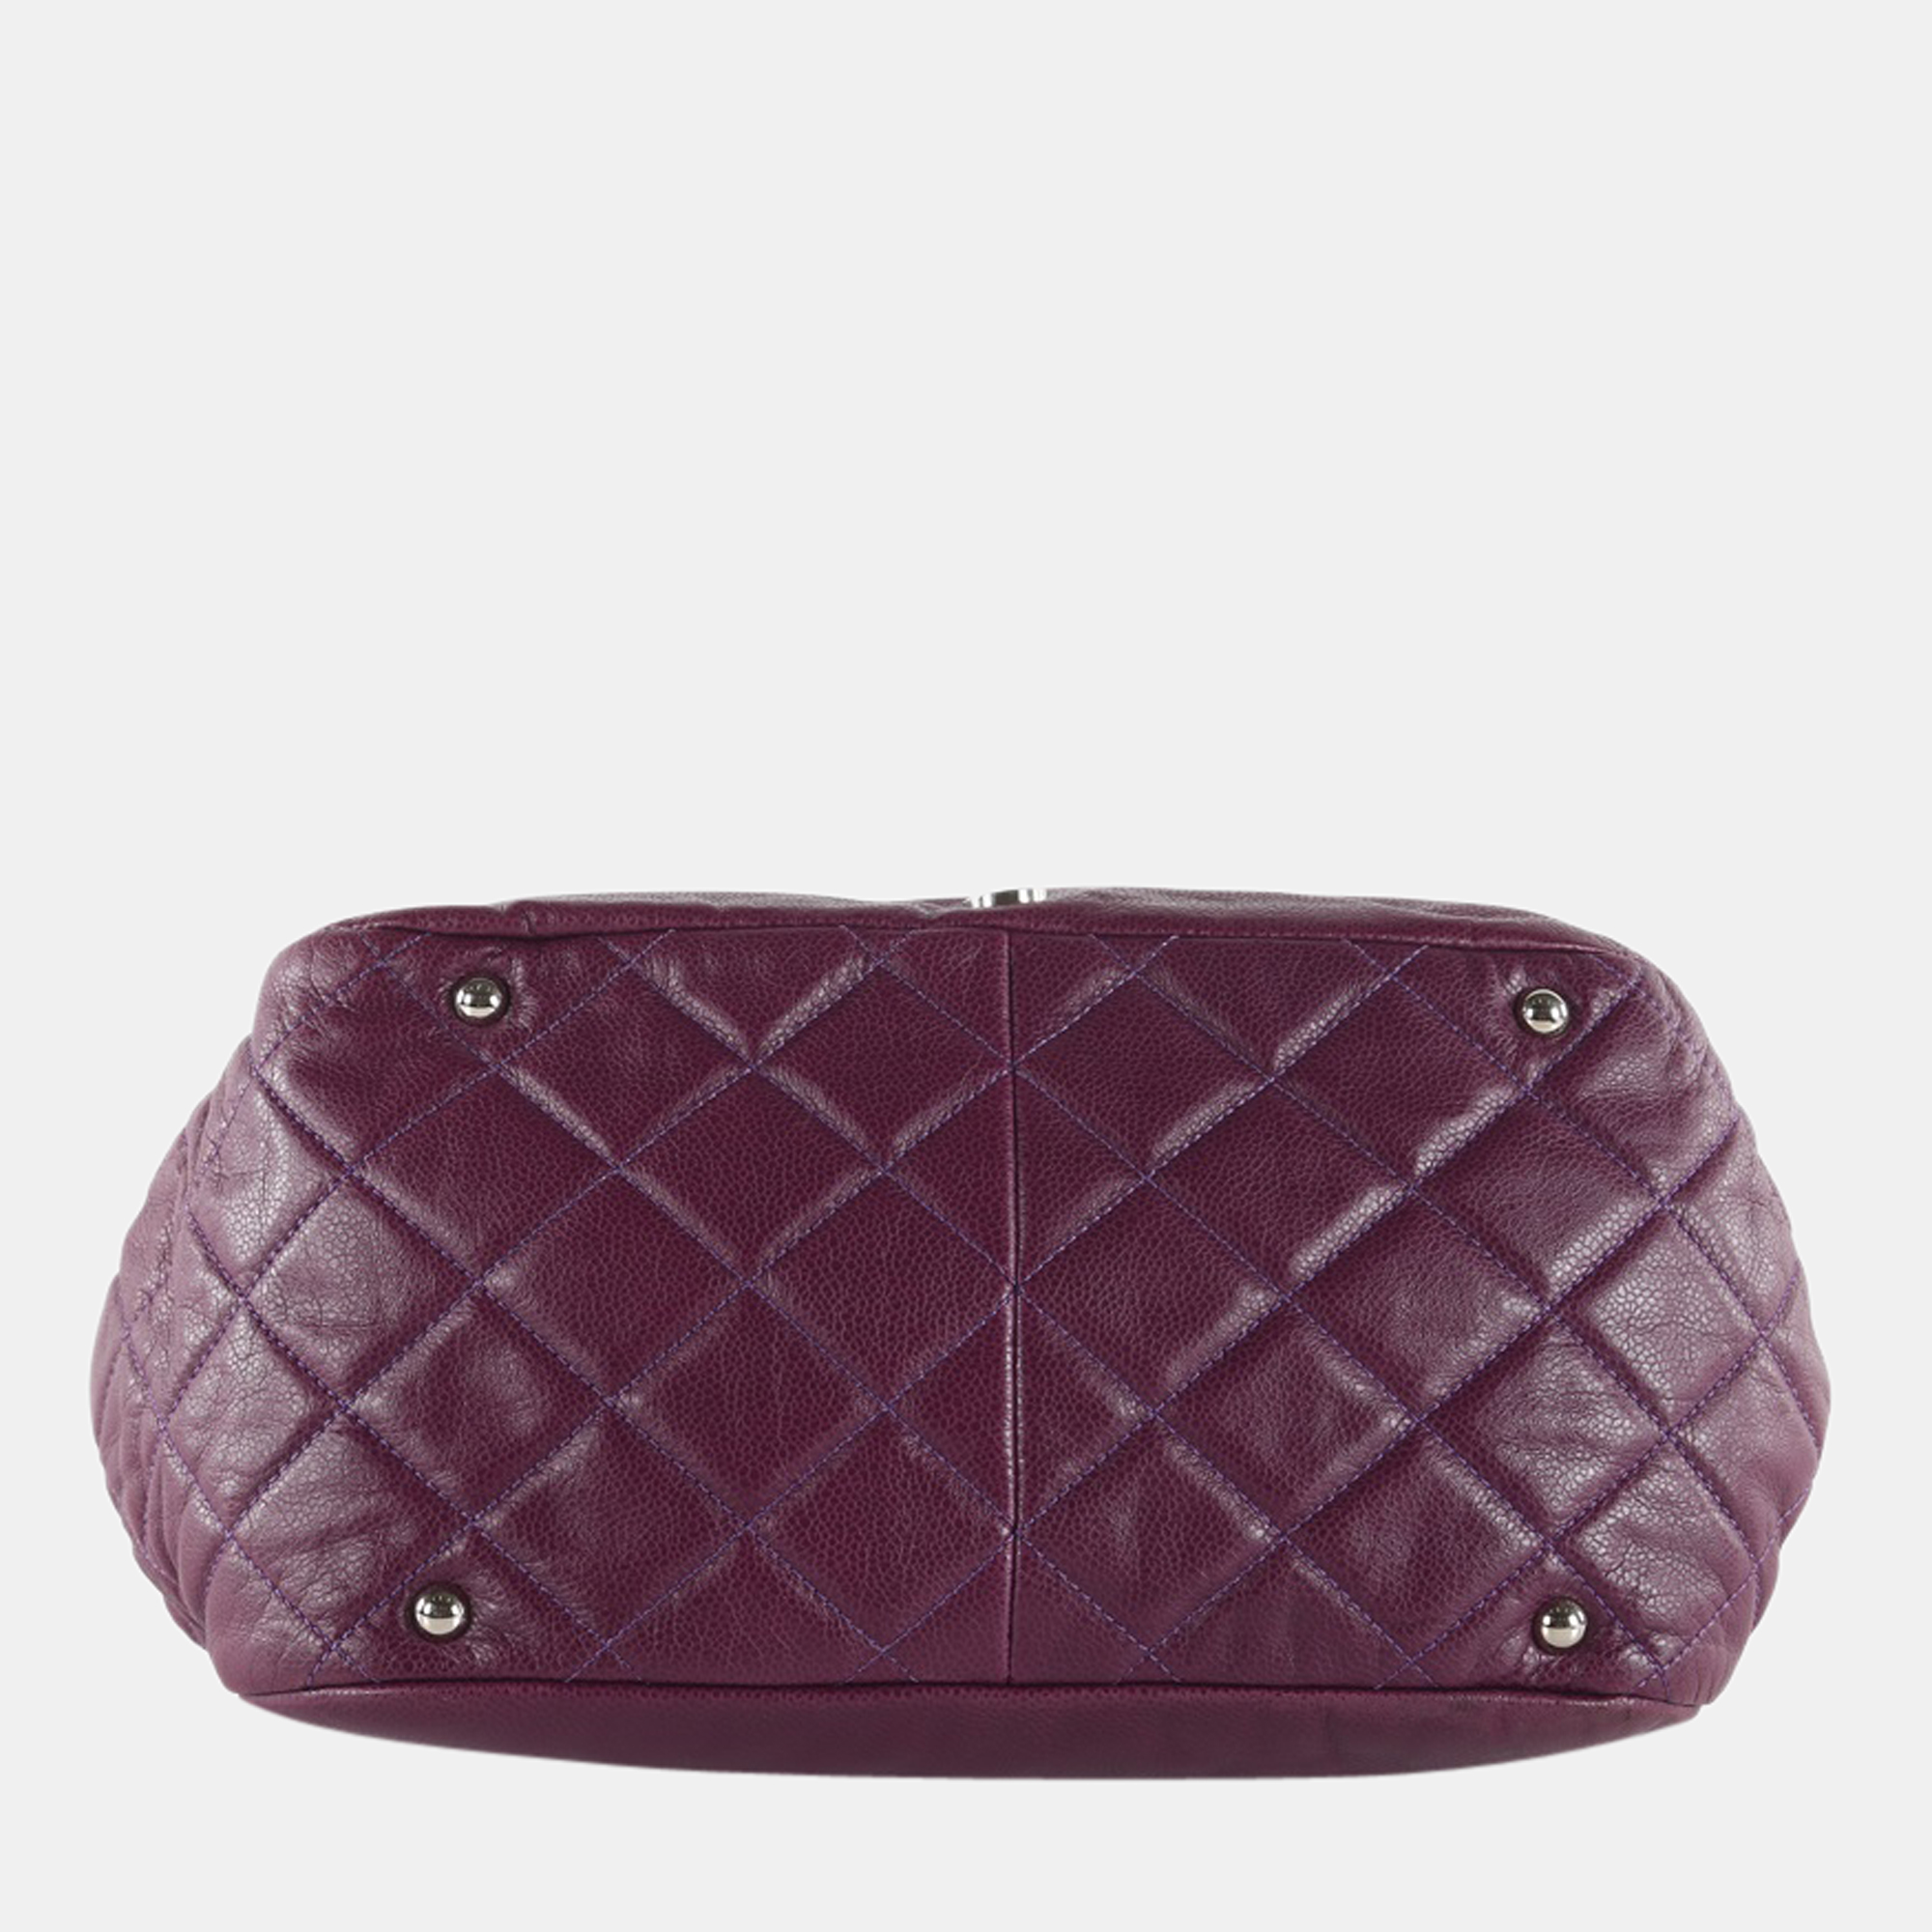 Chanel Magenta Leather Timeless Accordion Flap Bag